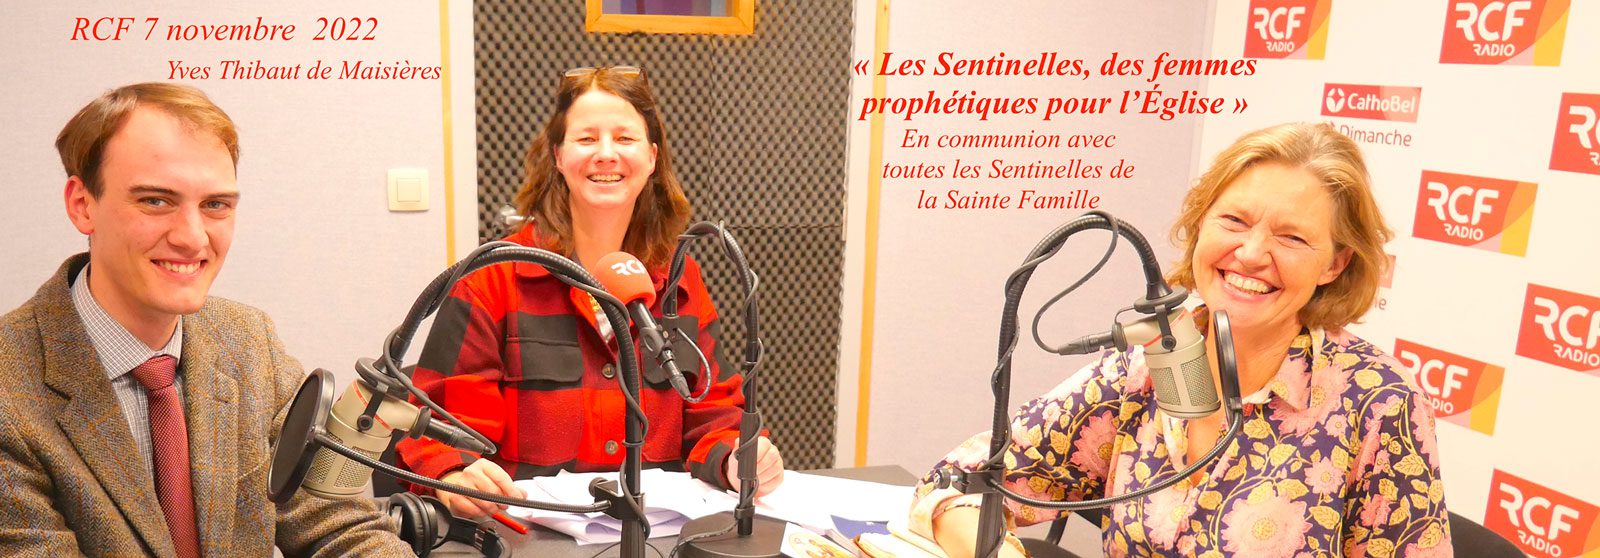 RCF--Les-Sentinelle,-prophetic-women-for-the-church